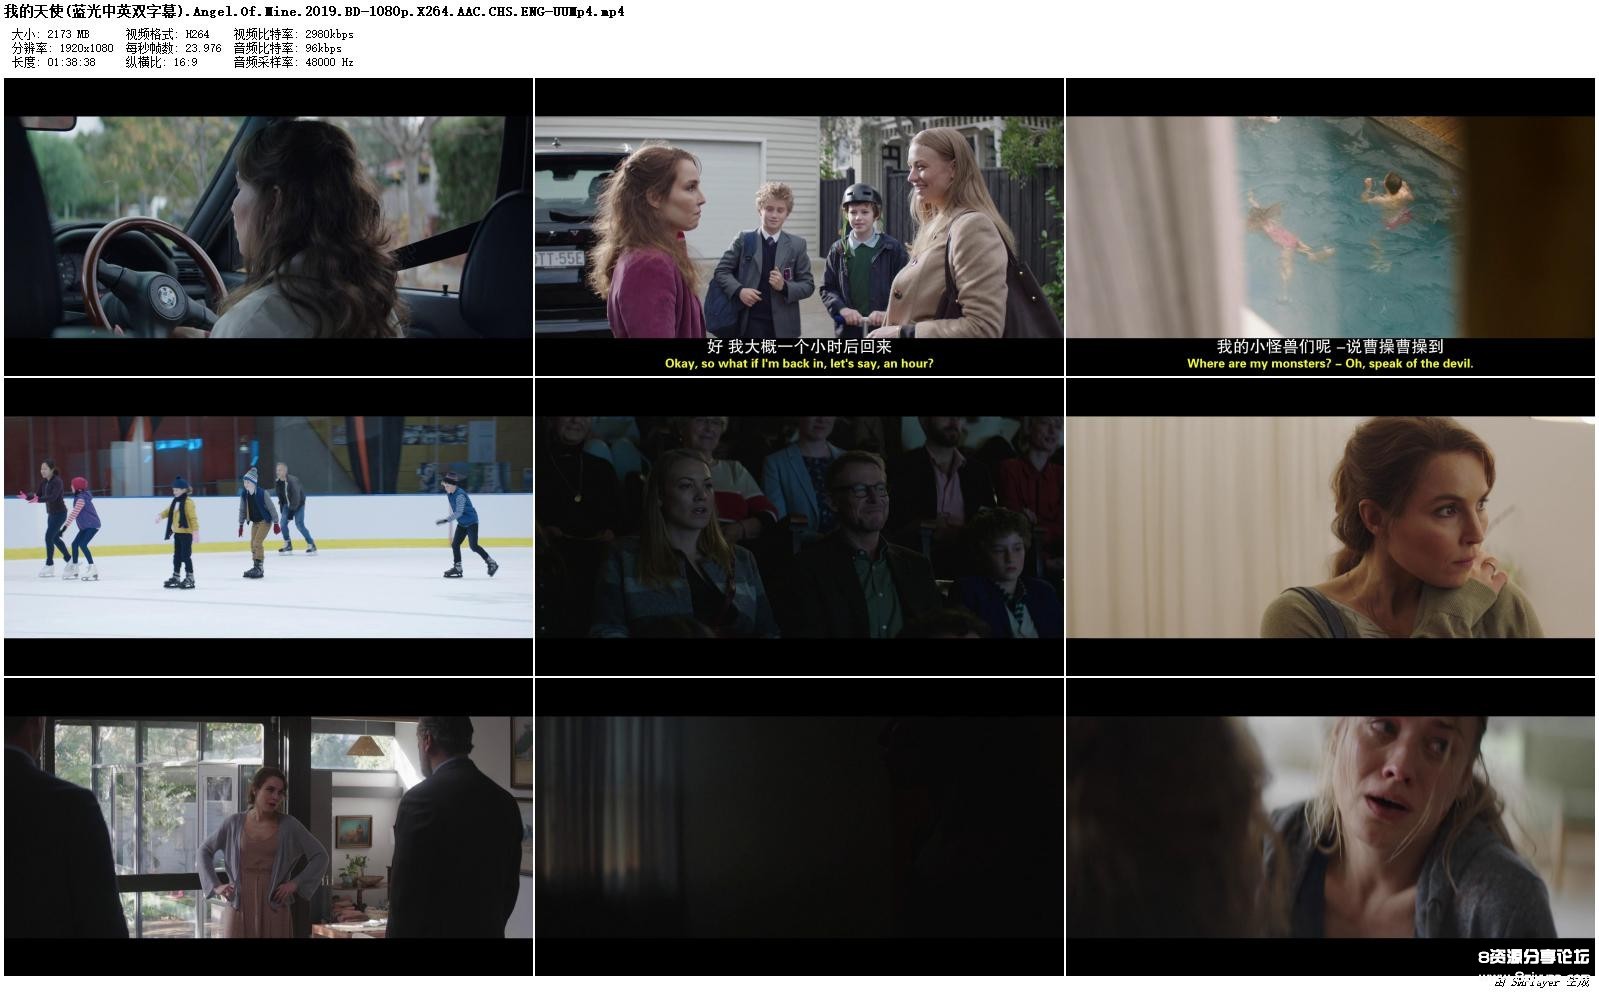 .Angel.Of.Mine.2019.BD-1080p.X264.AAC.CHS.ENG-UUMp4_preview.jpg